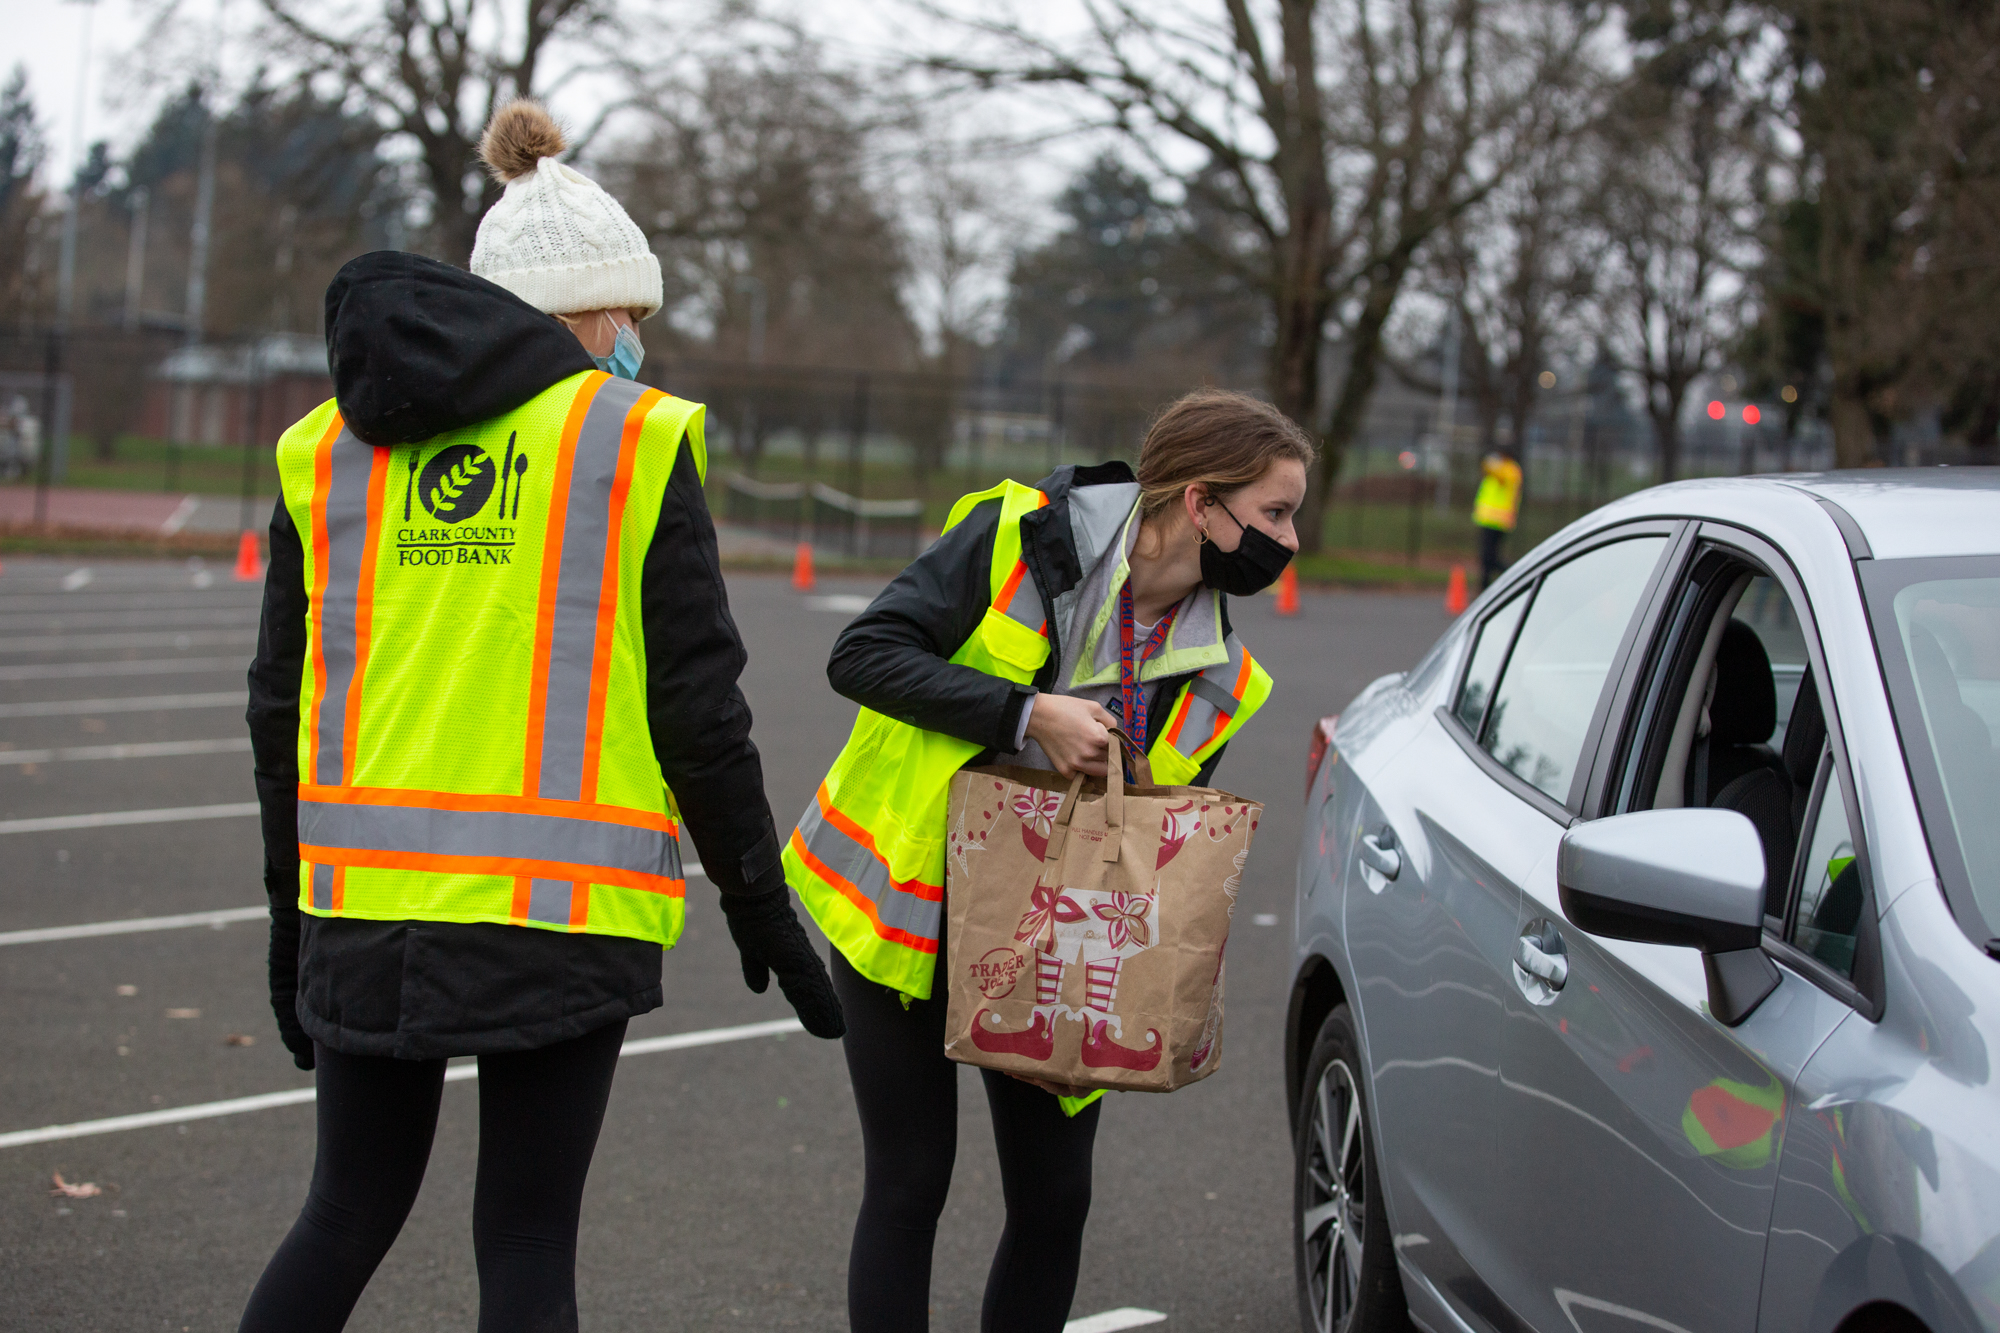 Seton Catholic High School students Cami Price, left, and Lara Carrion accept donations at a Drive & Drop food drive at Hudson's Bay High on Saturday. Price and Carrion were among a larger group of local National Honor Society students volunteering at the various drop off locations.